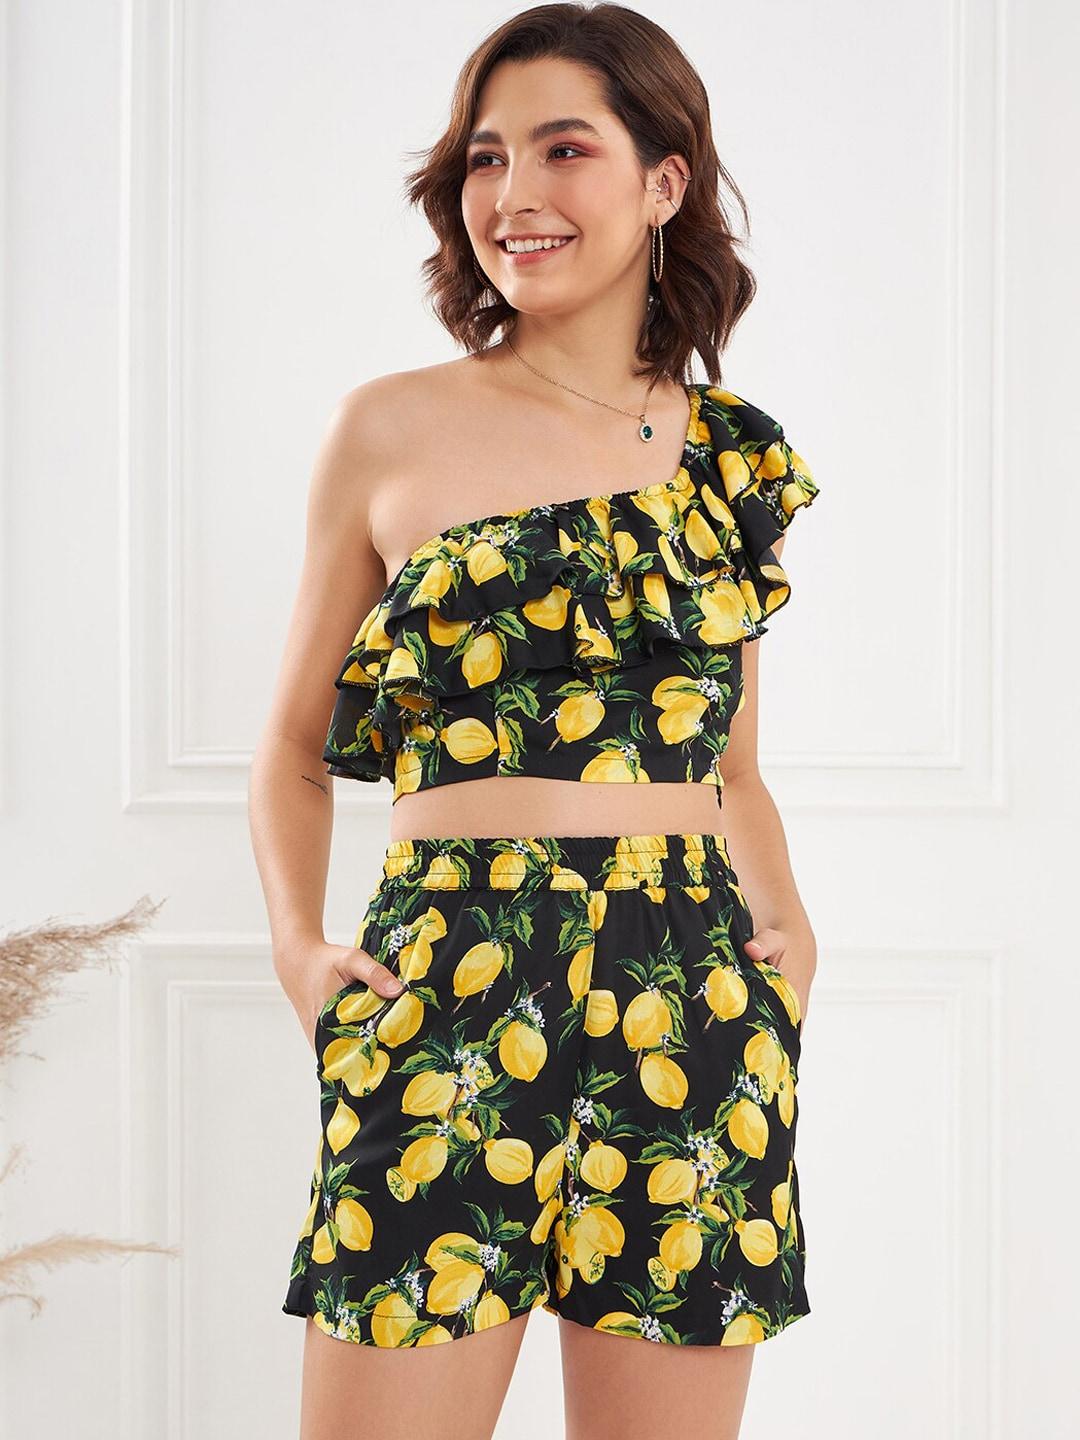 kassually black & yellow printed one-shoulder crop top with shorts